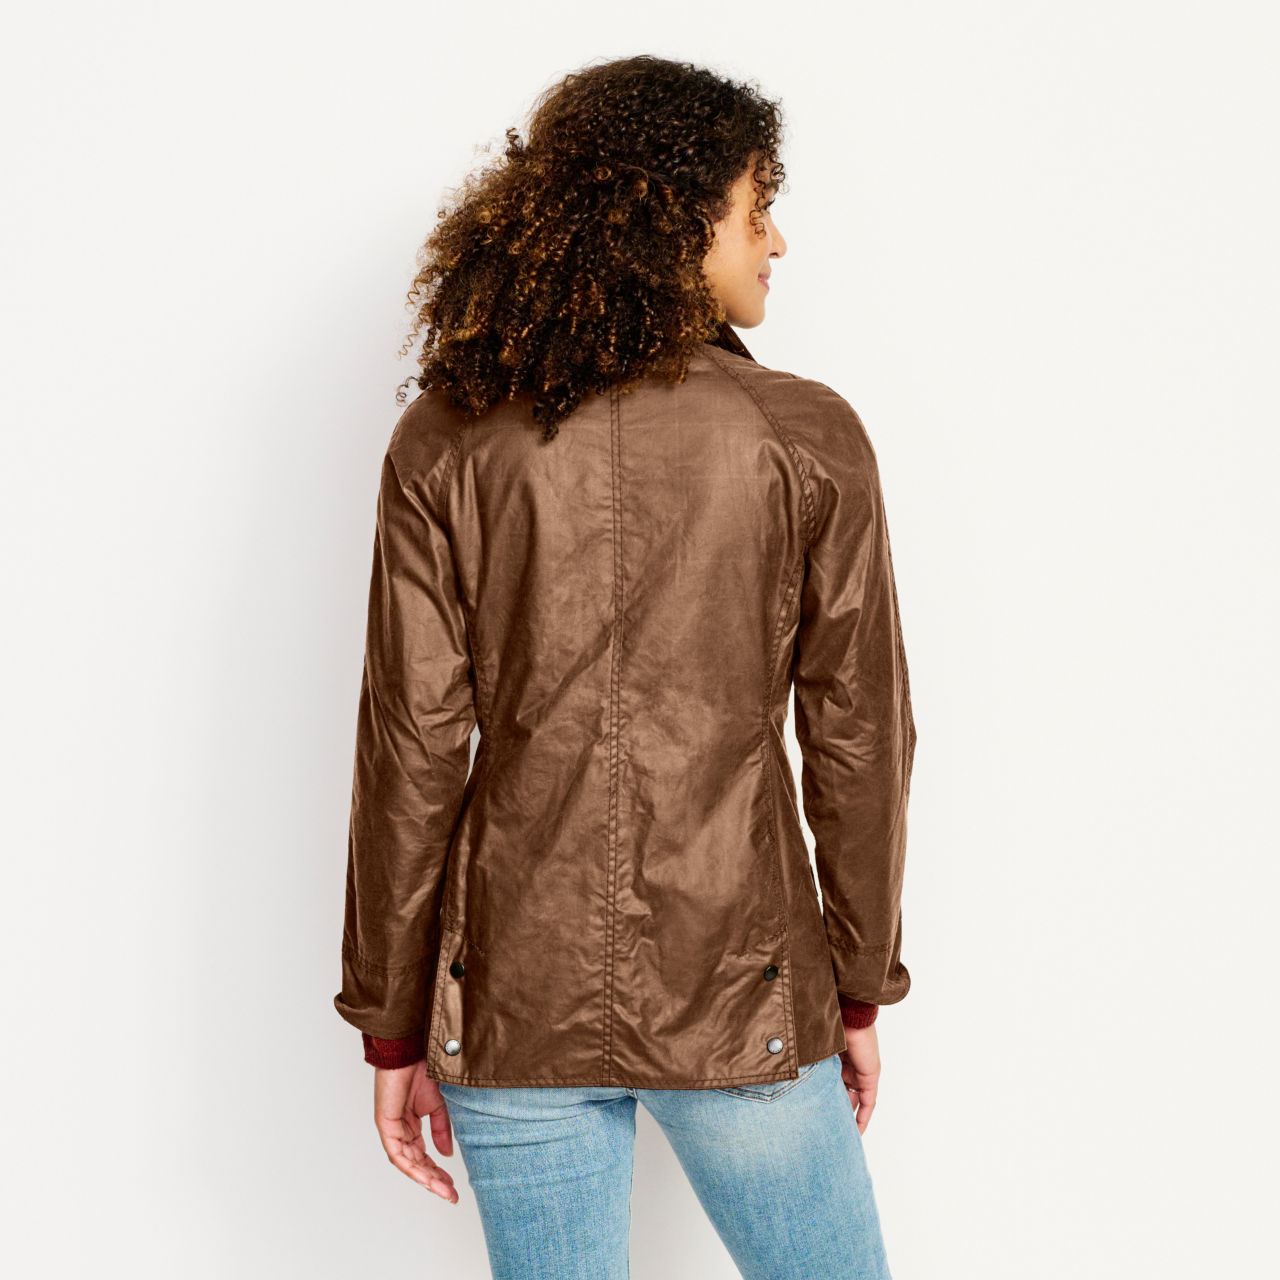 Barbour® Women’s Classic Beadnell Jacket - BARK - ORVIS EXCLUSIVE image number 4